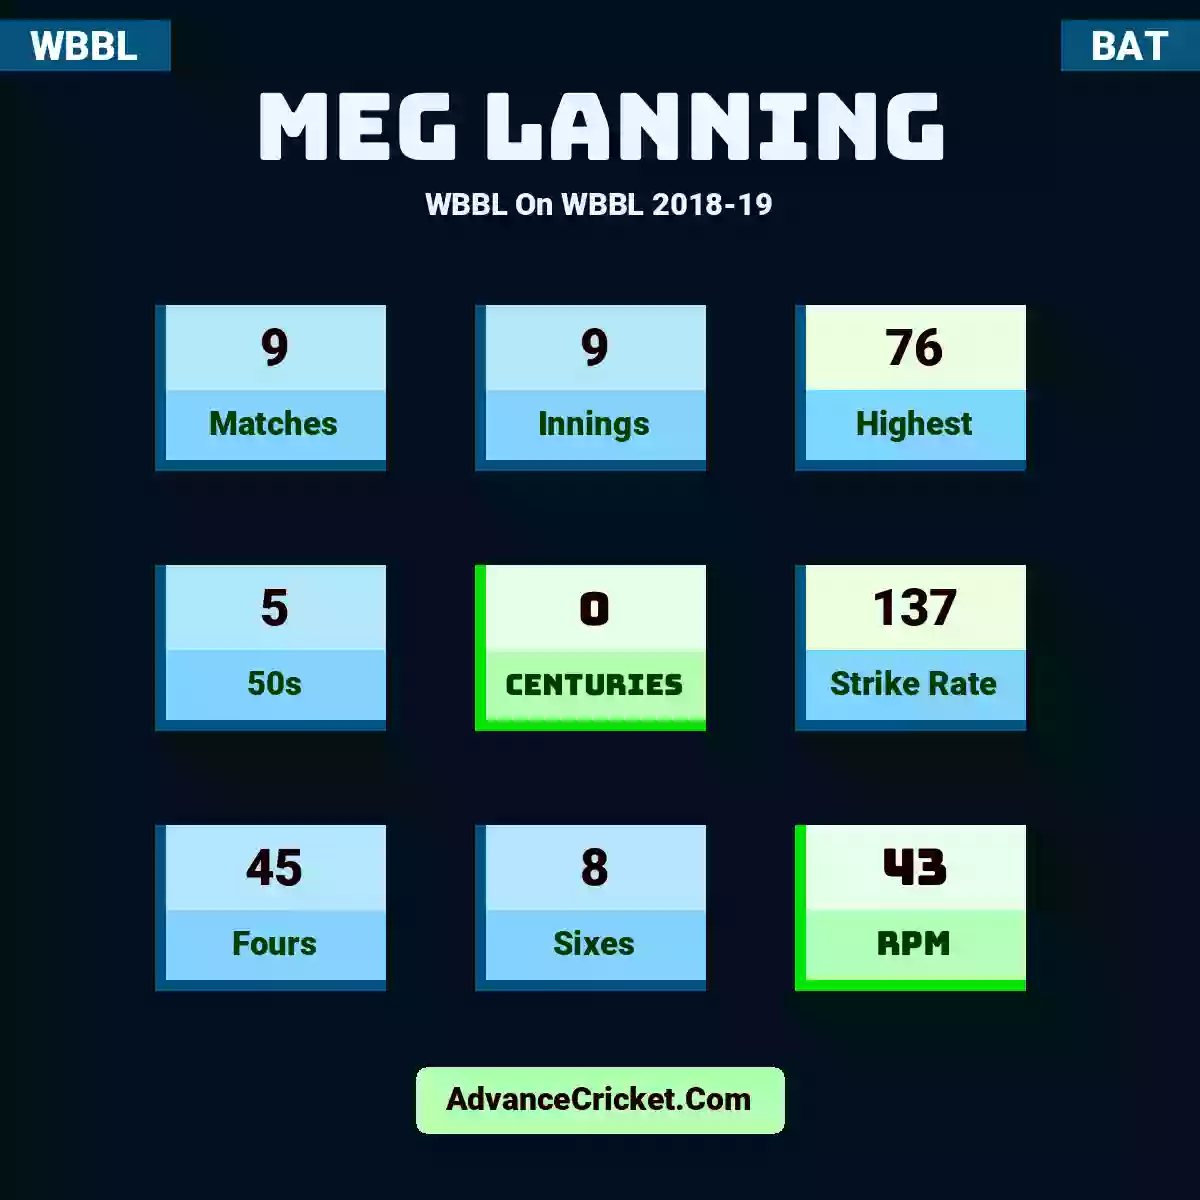 Meg Lanning WBBL  On WBBL 2018-19, Meg Lanning played 9 matches, scored 76 runs as highest, 5 half-centuries, and 0 centuries, with a strike rate of 137. M.Lanning hit 45 fours and 8 sixes, with an RPM of 43.